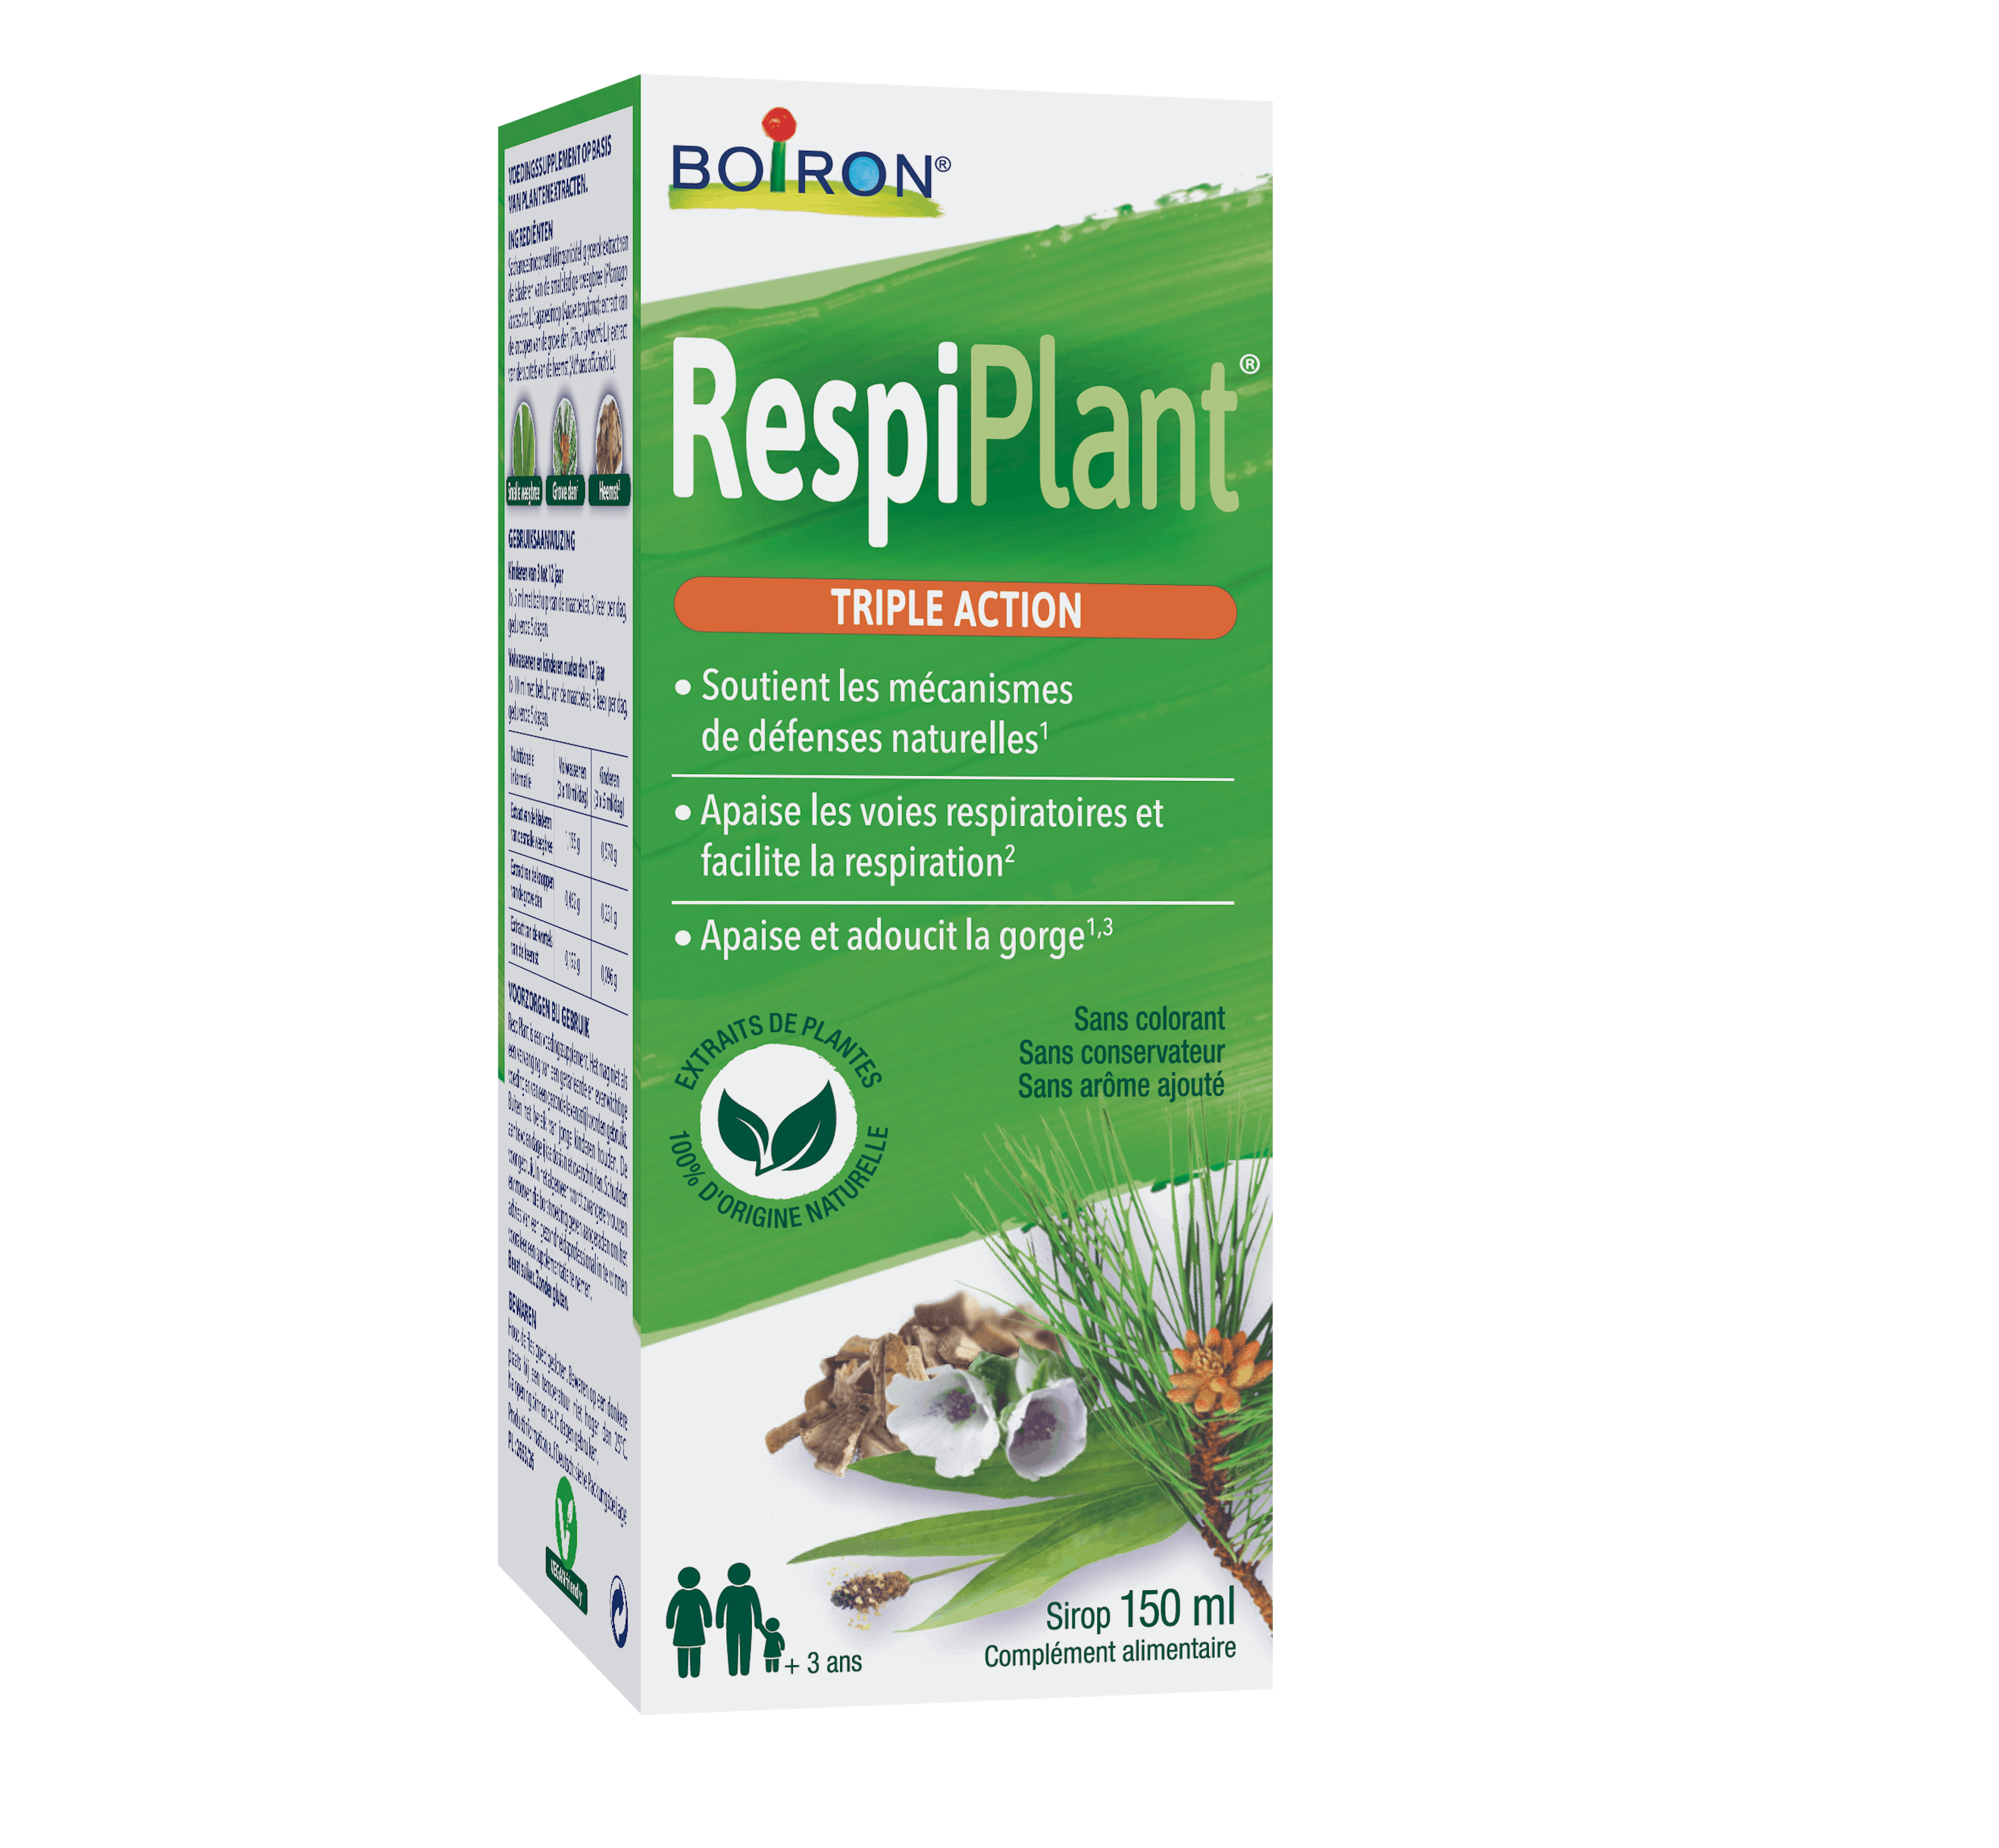 respiplant-packaging